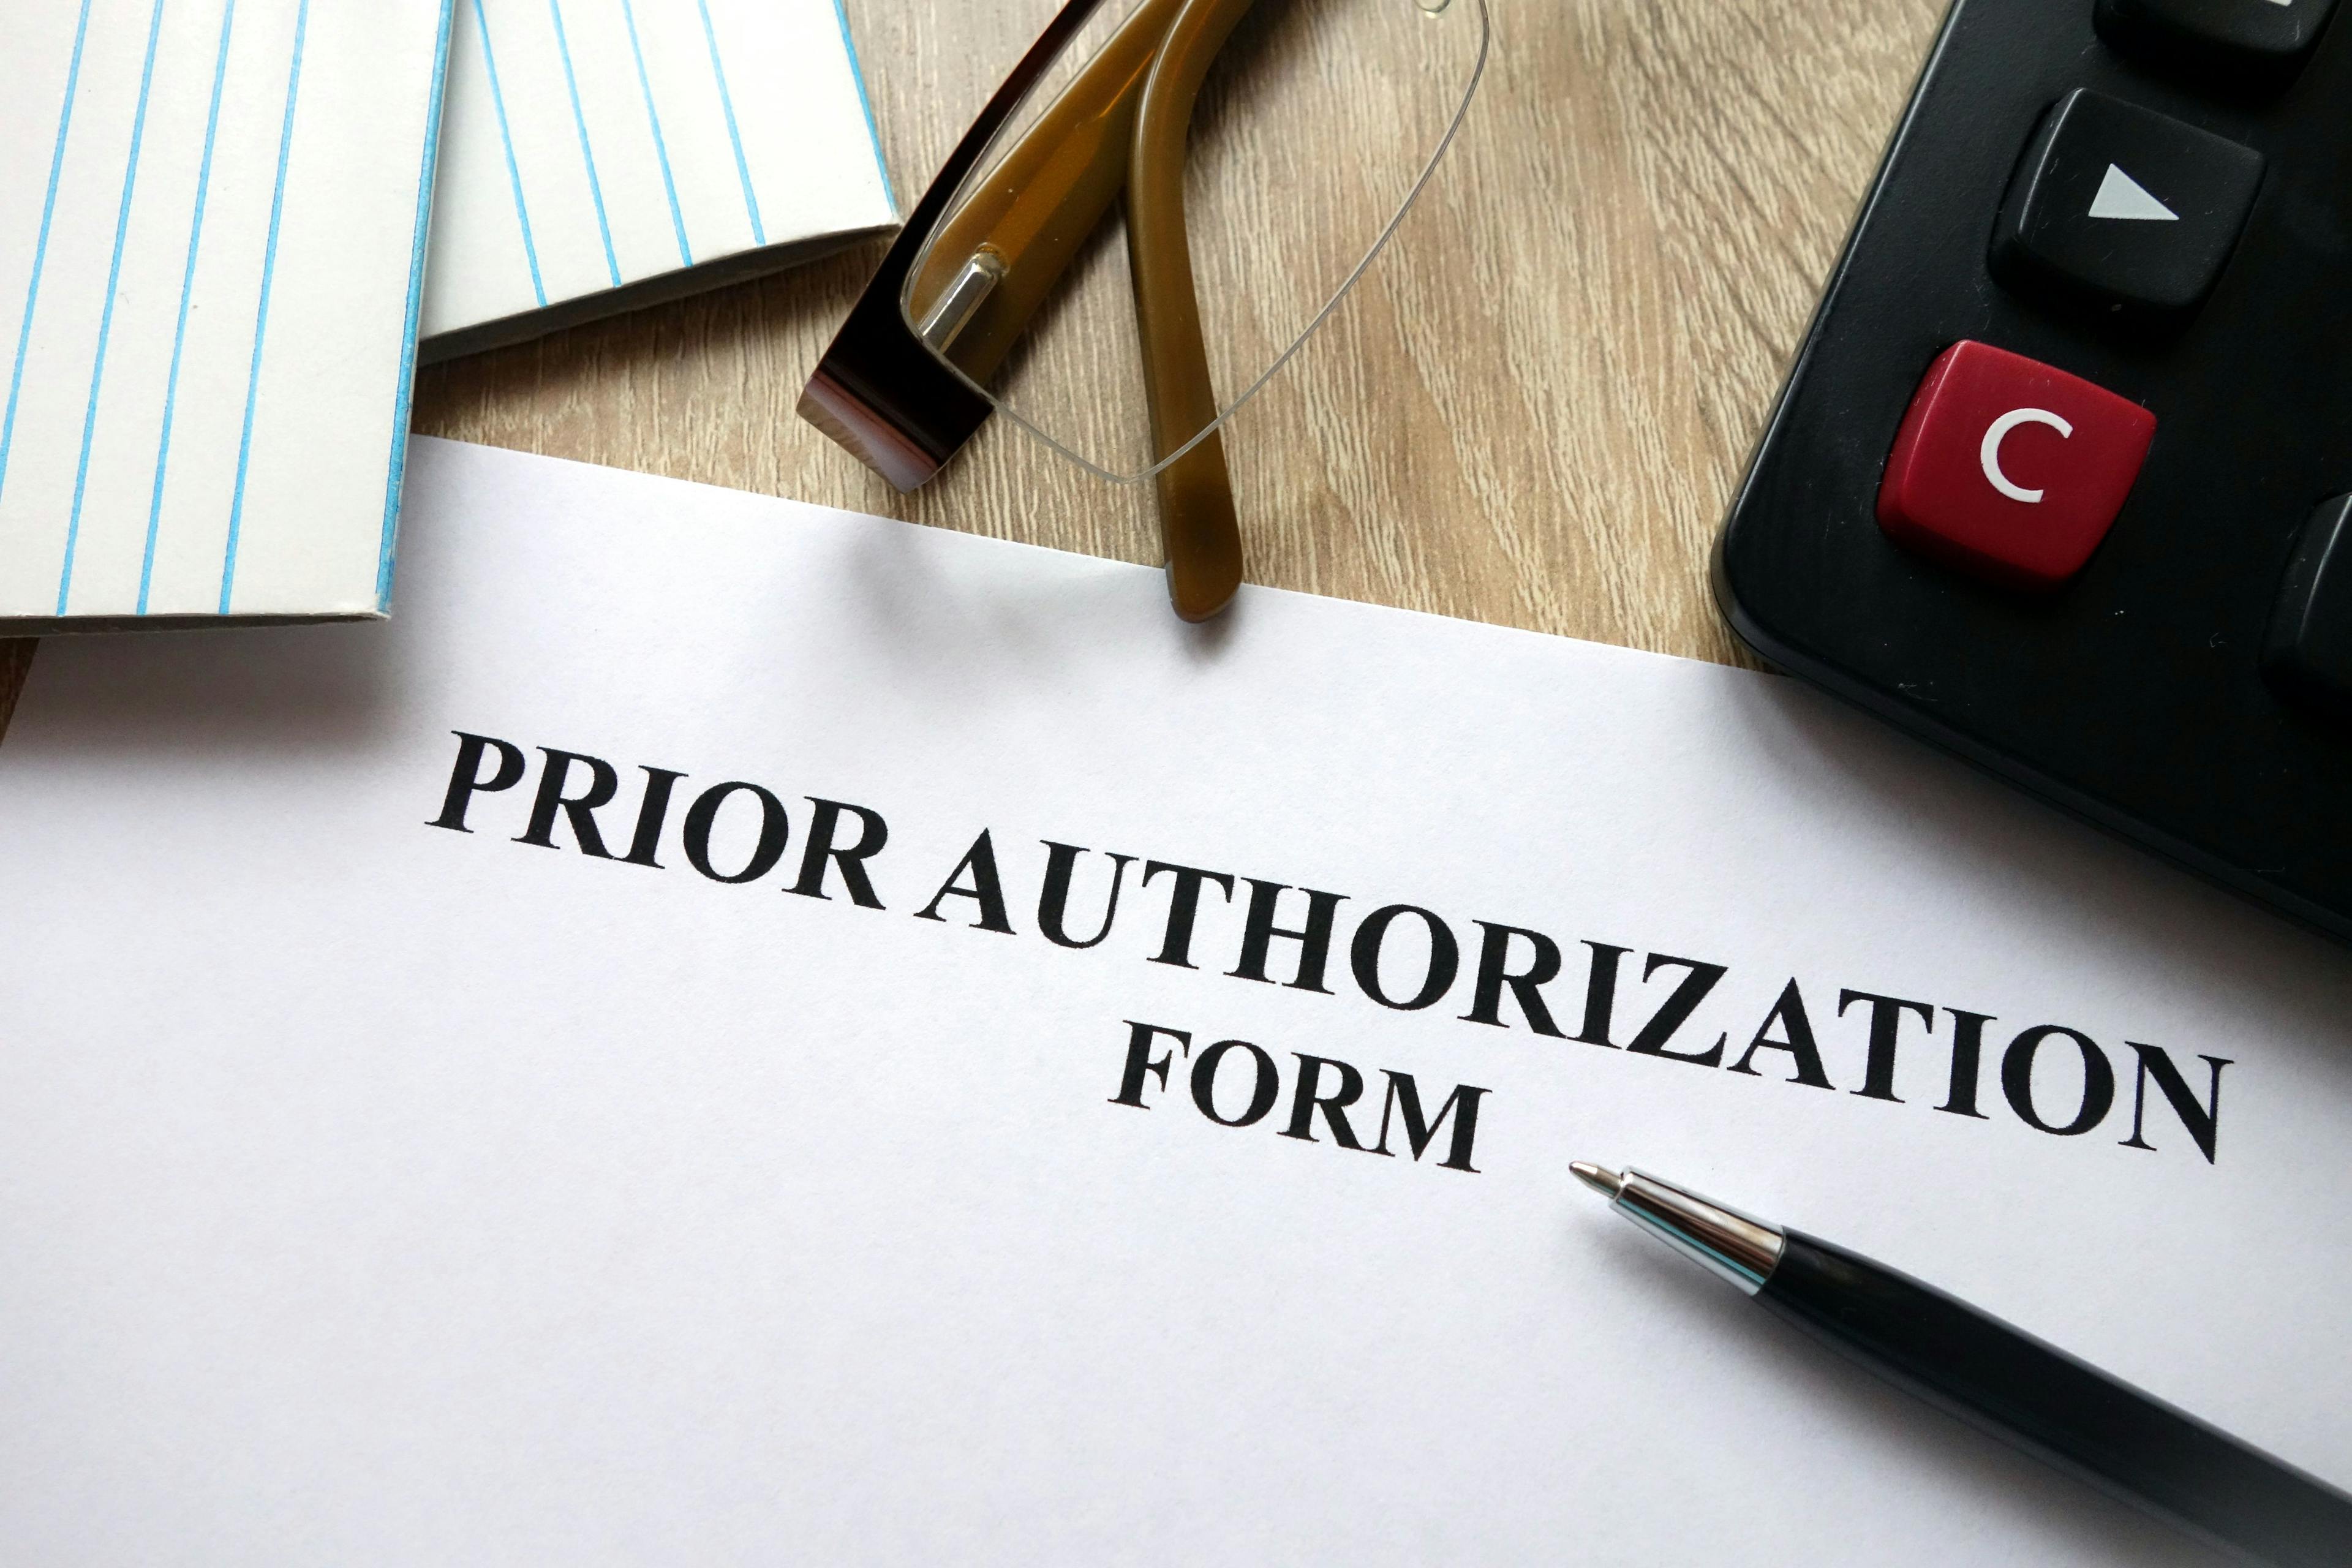 The Academy noted it is behind the CMS effort to streamline the prior authorization process, expressing its support for the regulatory changes in the rule and urging quick finalization of those policies this year. (Image courtesy of Adobe Stock/Piter2021)